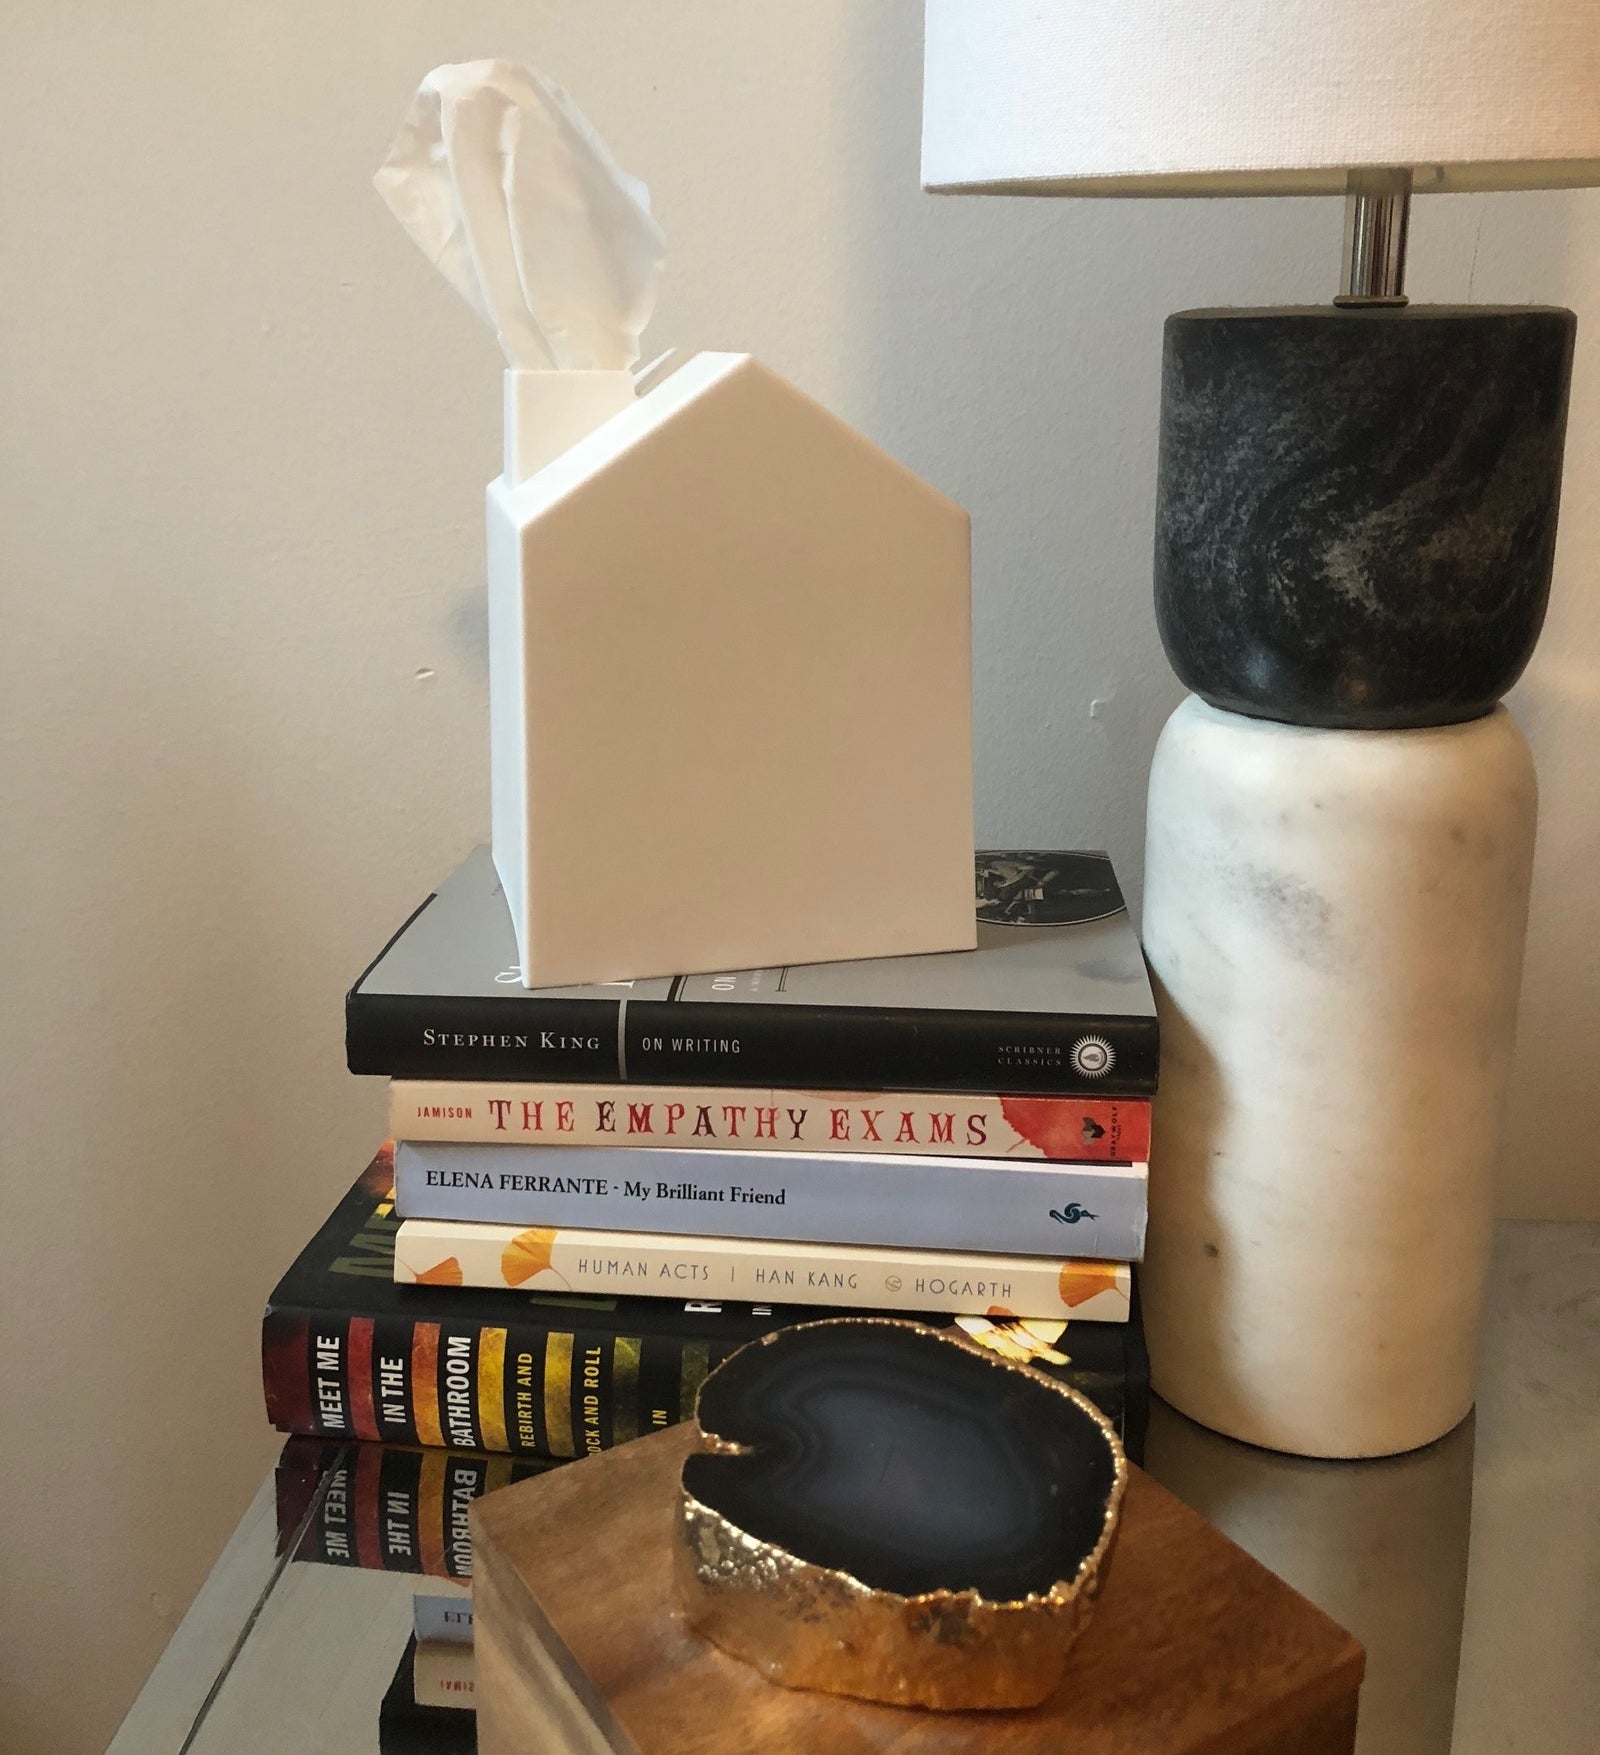 The house-shaped tissue box on a stack of books next to a lamp